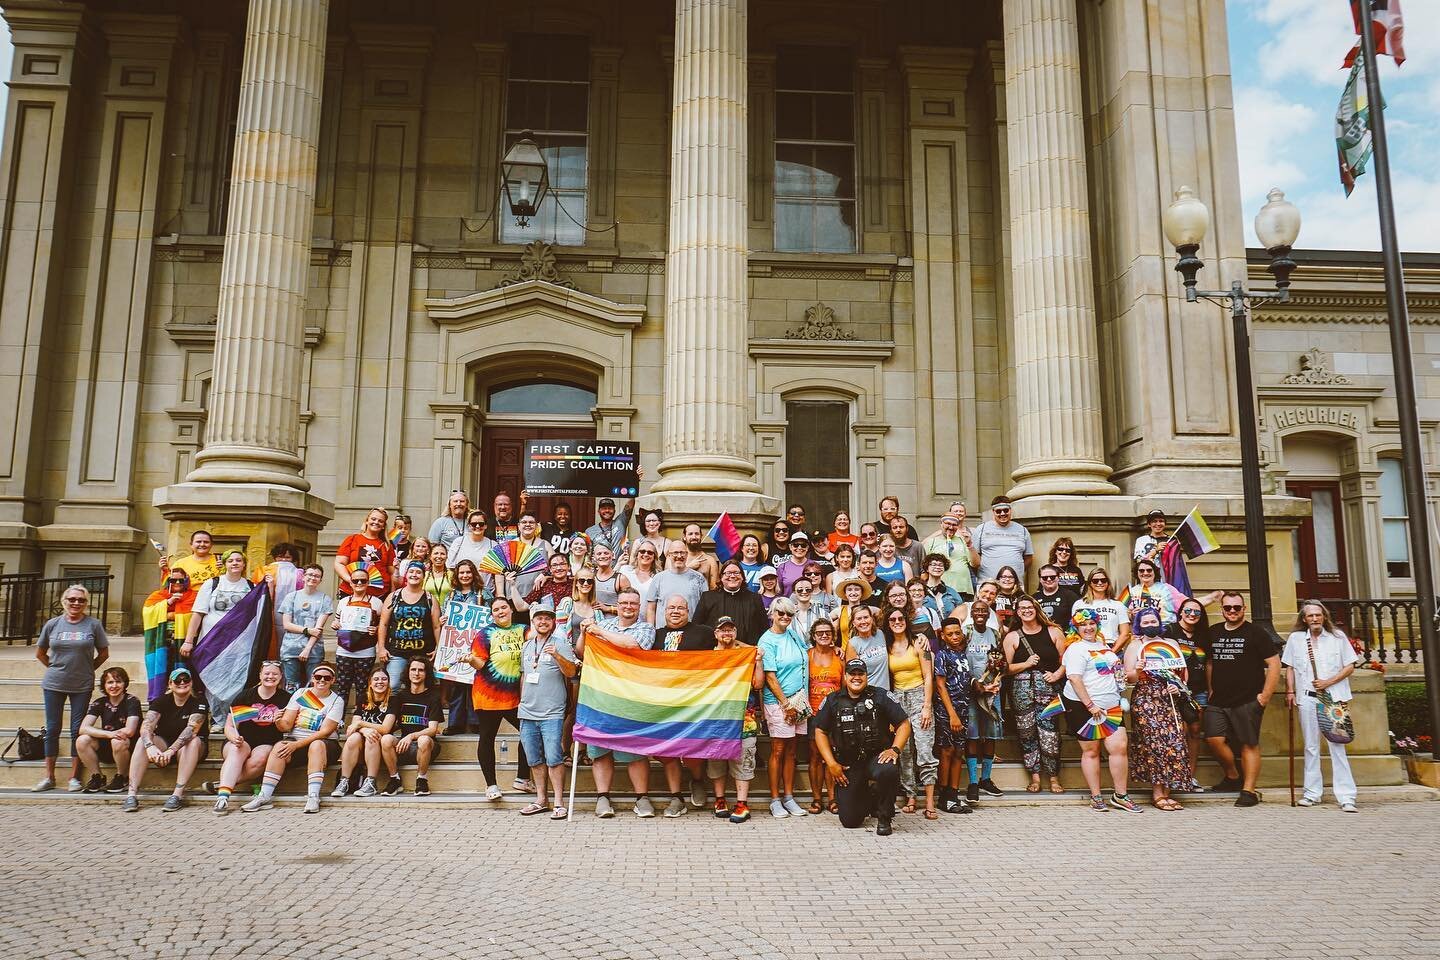 CrossFit Incognito is thankful for the opportunity to participate in First Capital Pride&rsquo;s festival recently. 

Their mission is to provide the LGBTQIA+ citizens of Ross County a safe, welcoming community through diverse community events, advoc